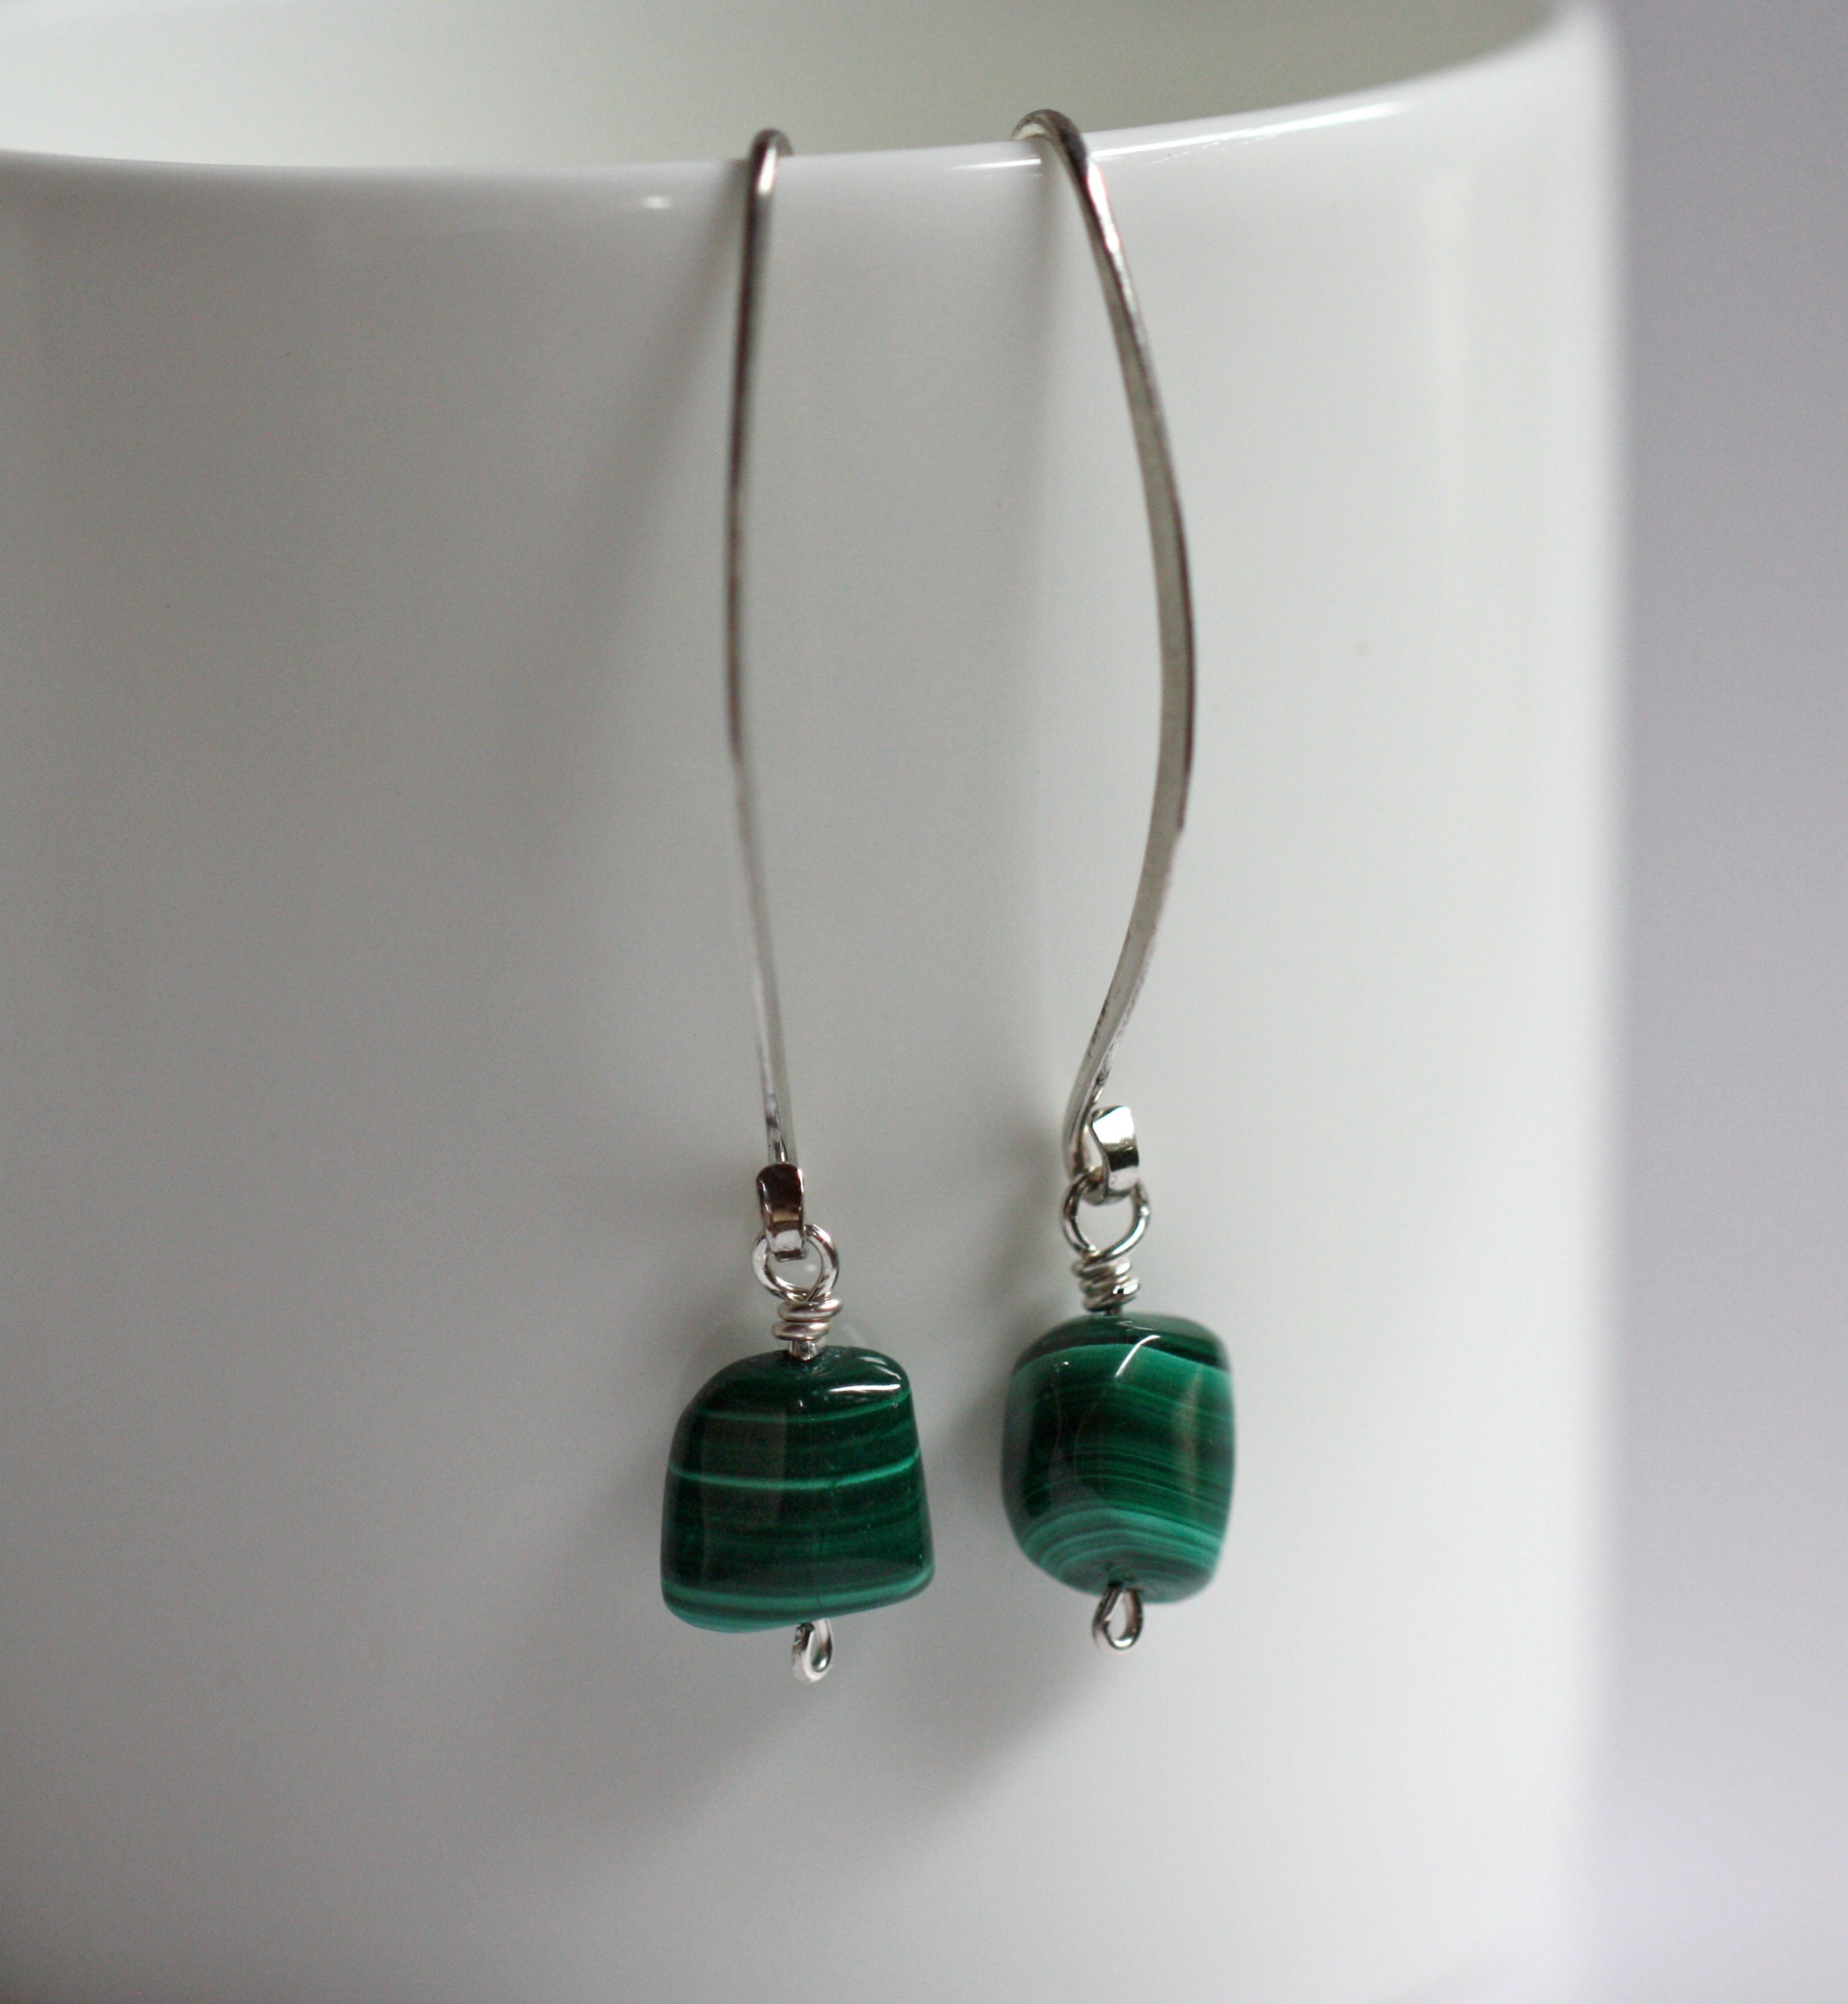 Large Hook Earrings of Sterling Silver and Malachite